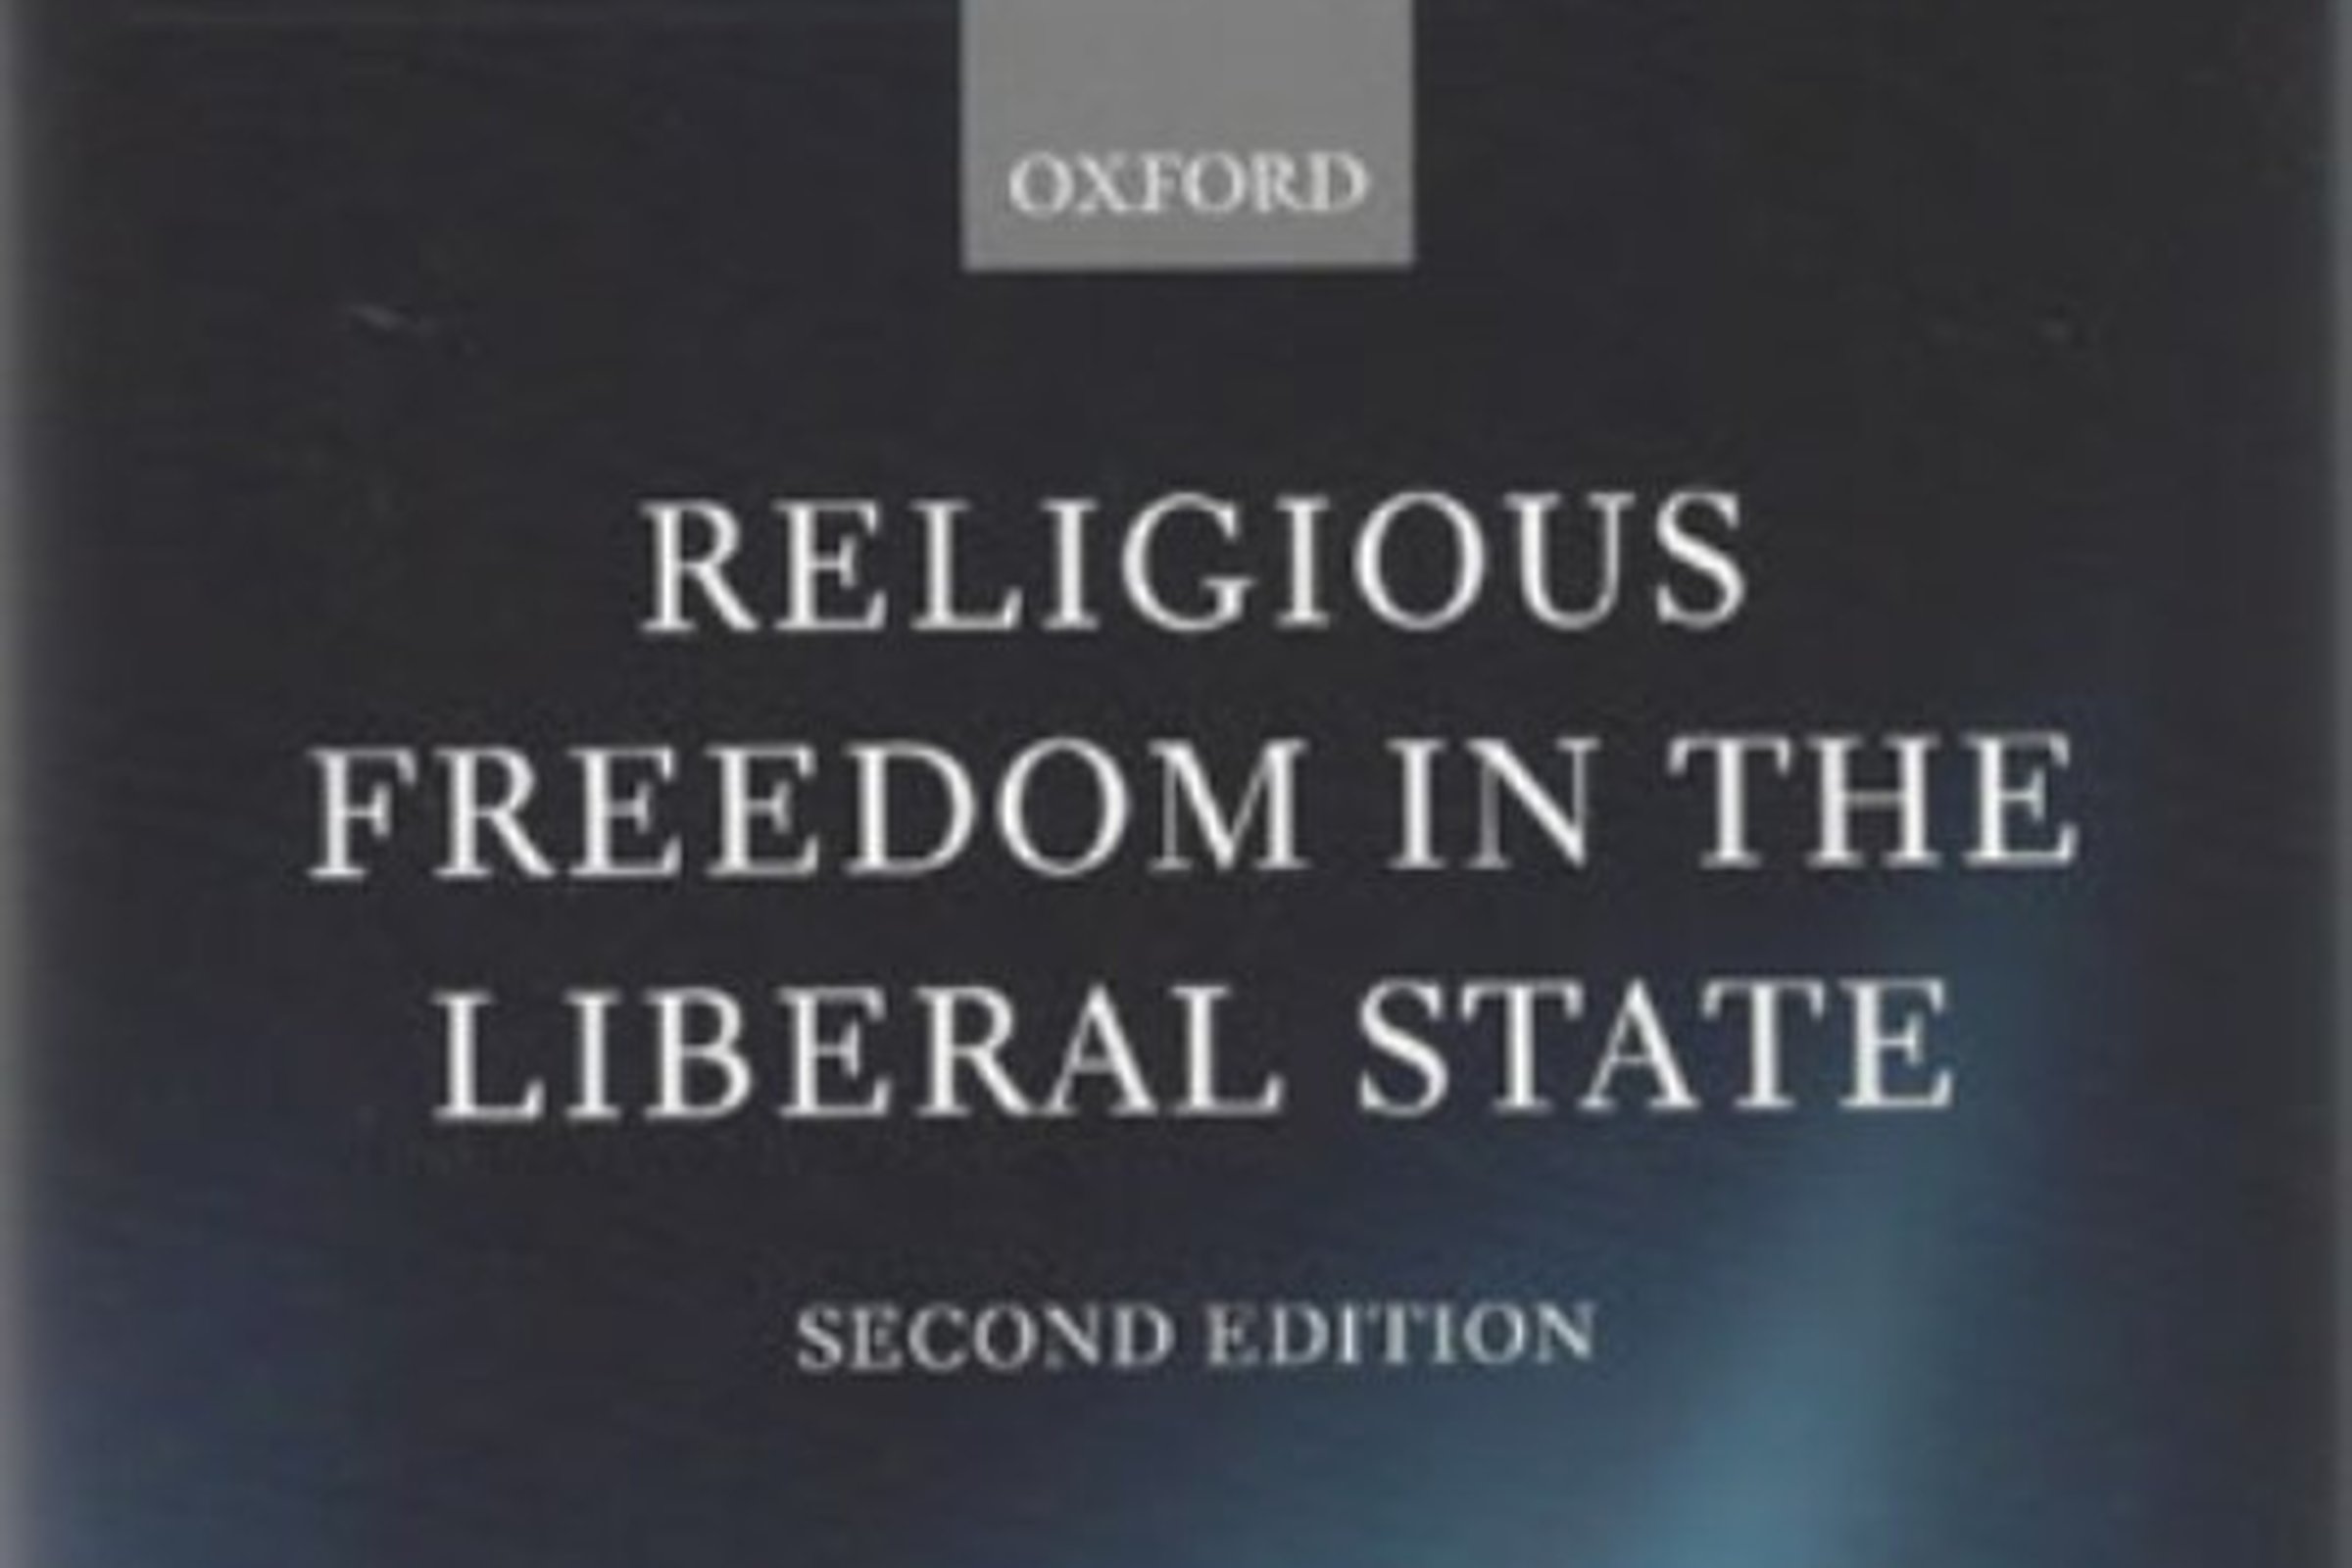 Religious Freedom in the Liberal state